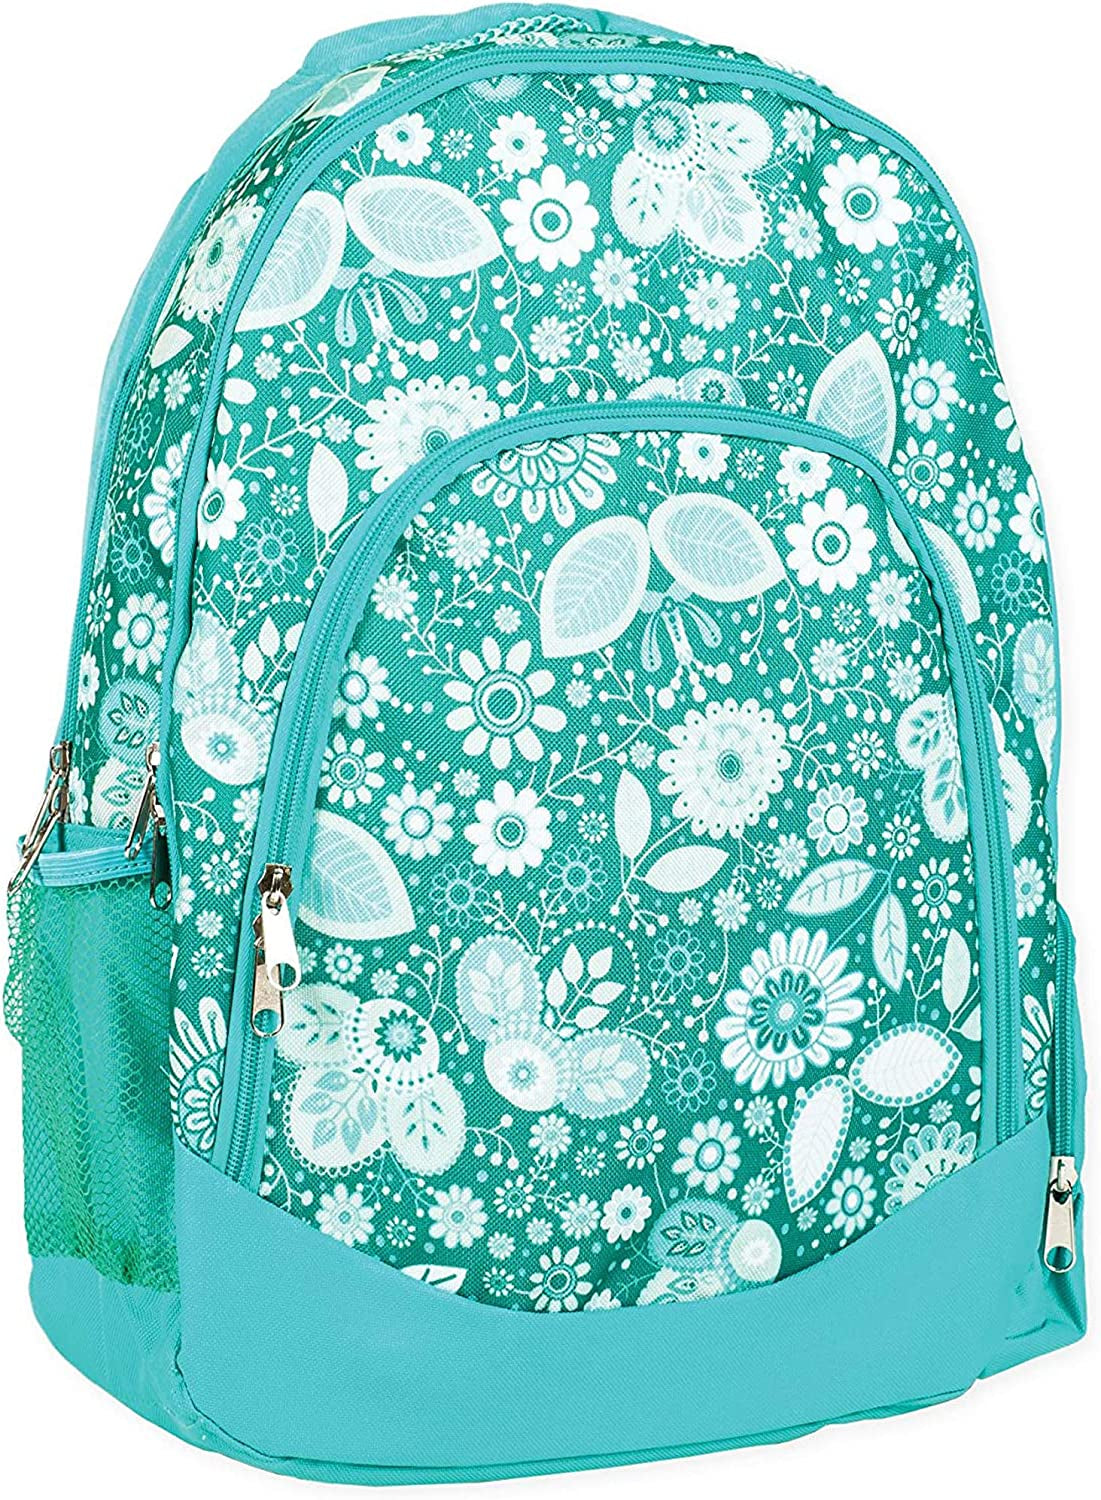 Blue Vibrant Medallion Reinforced and Water Resistant Padded Laptop School Backpack